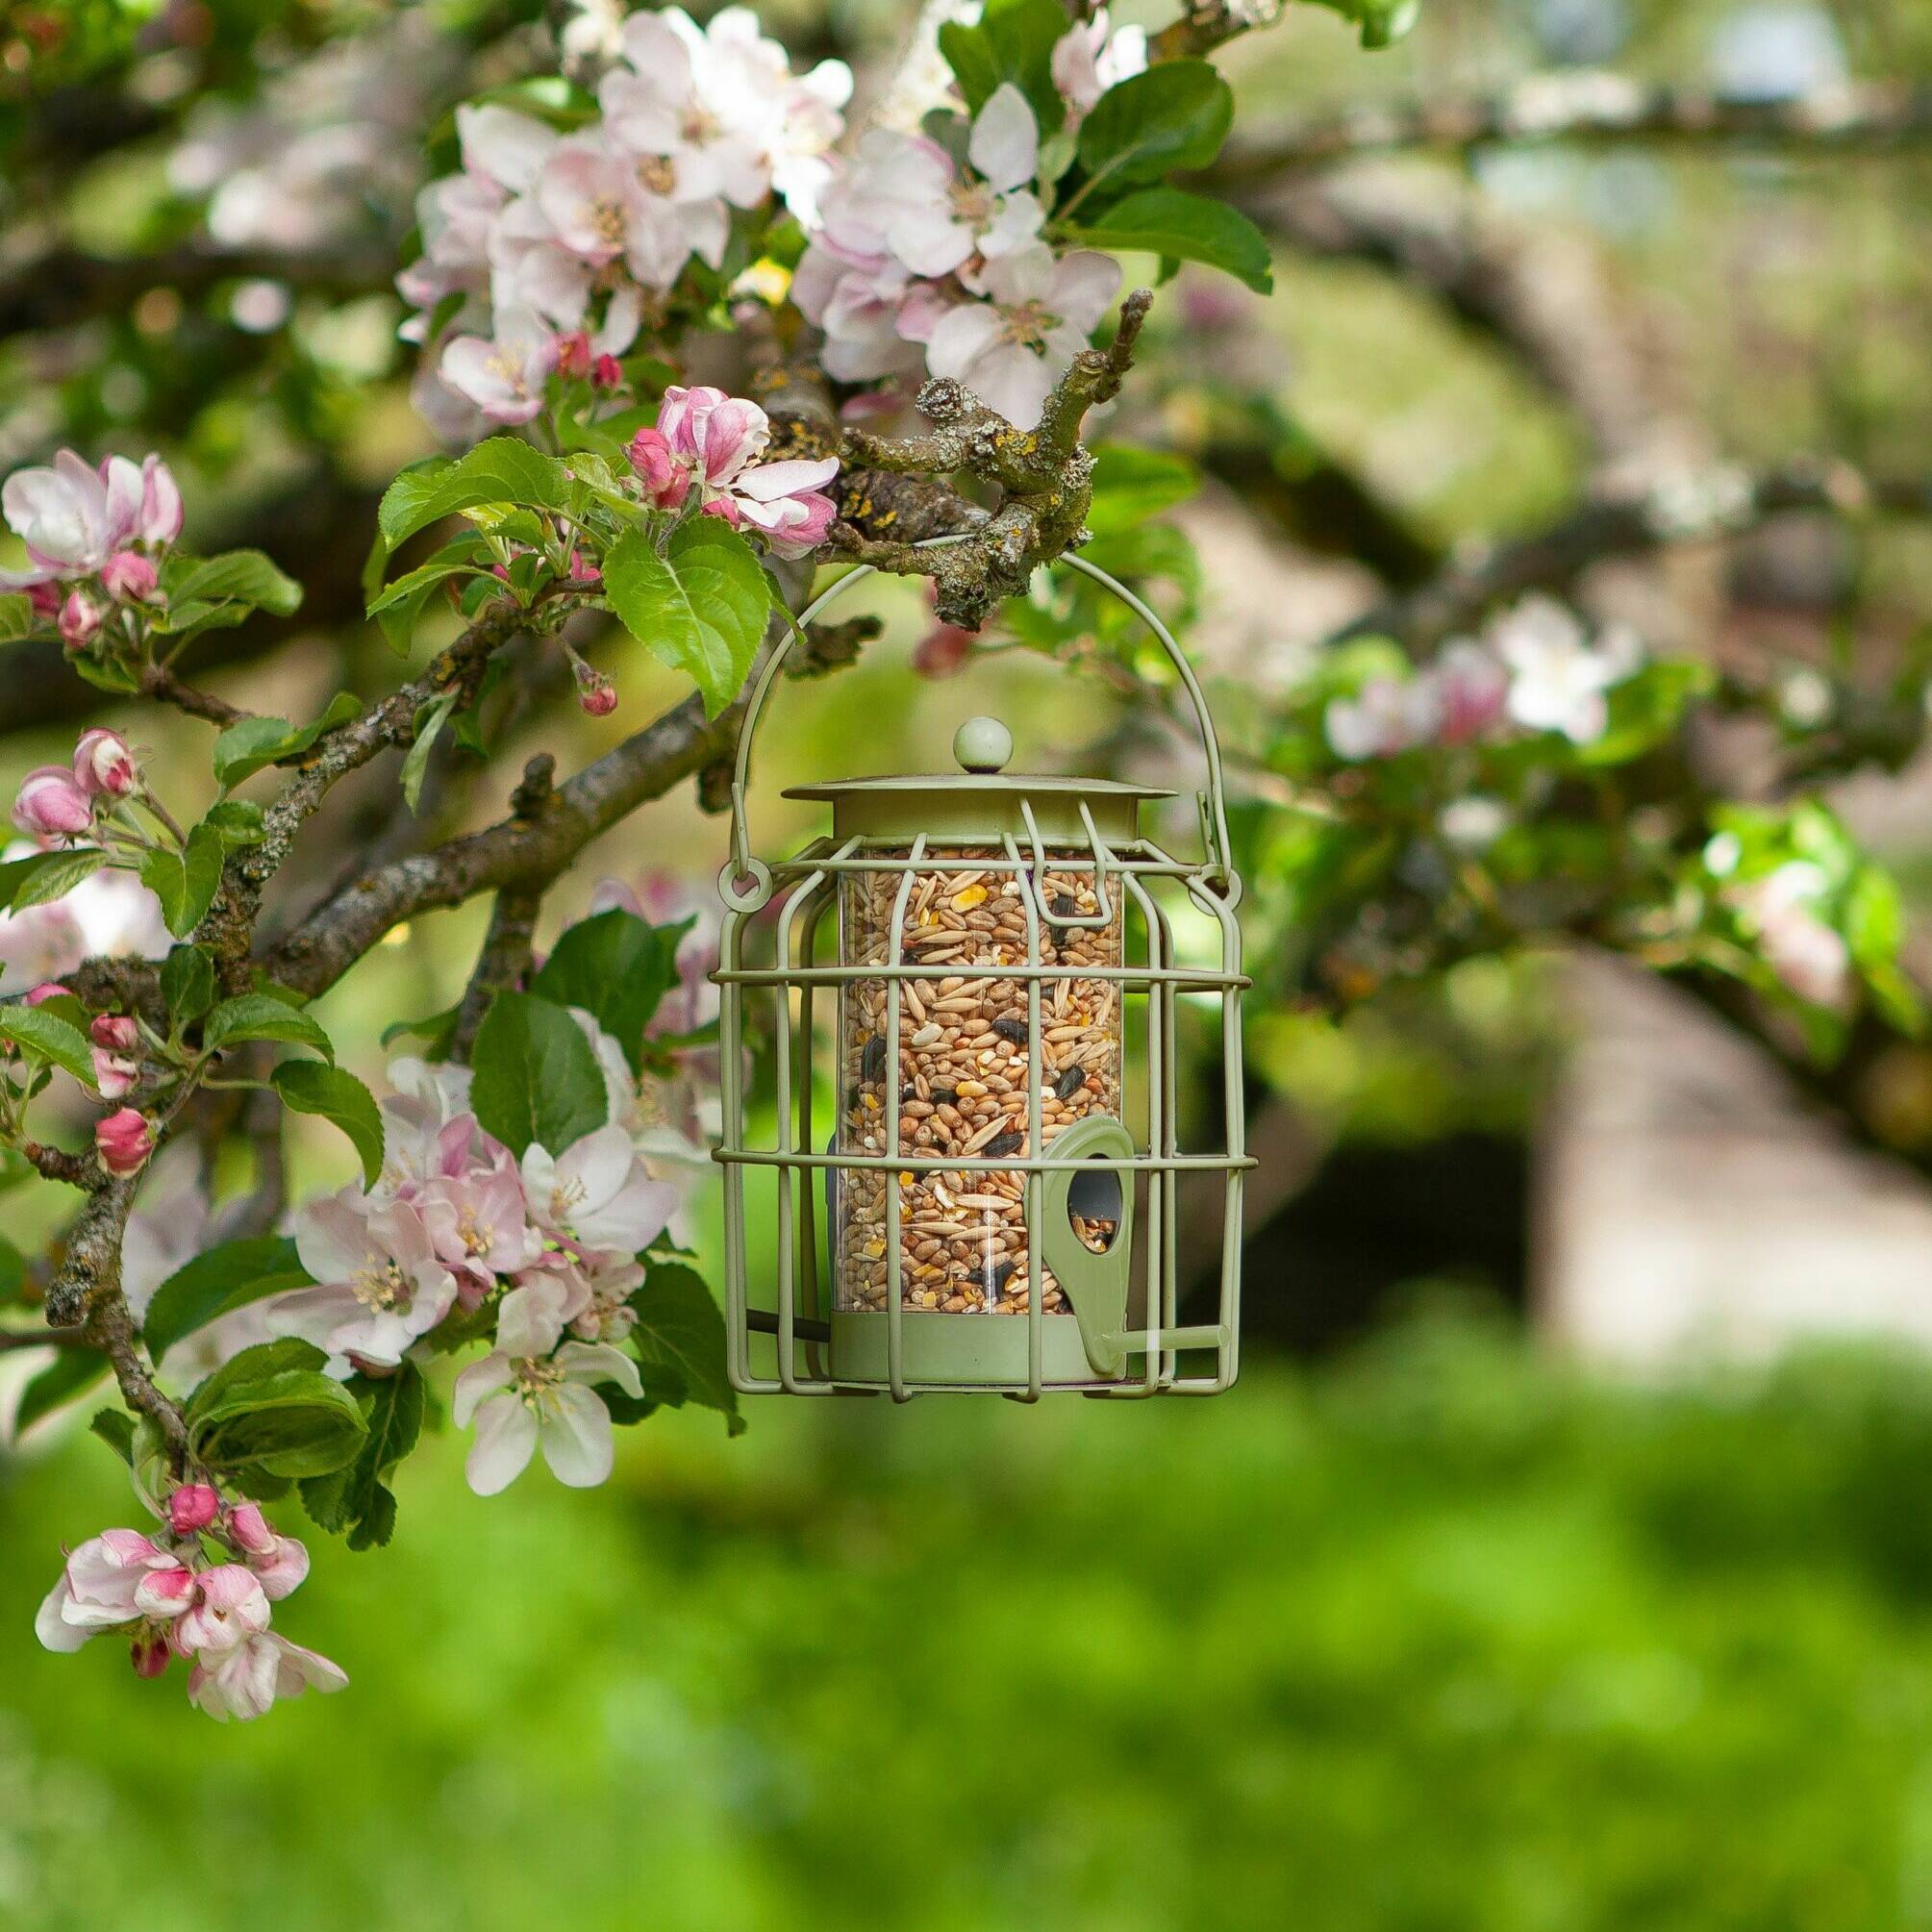 Compact Squirrel Proof Seed Feeder